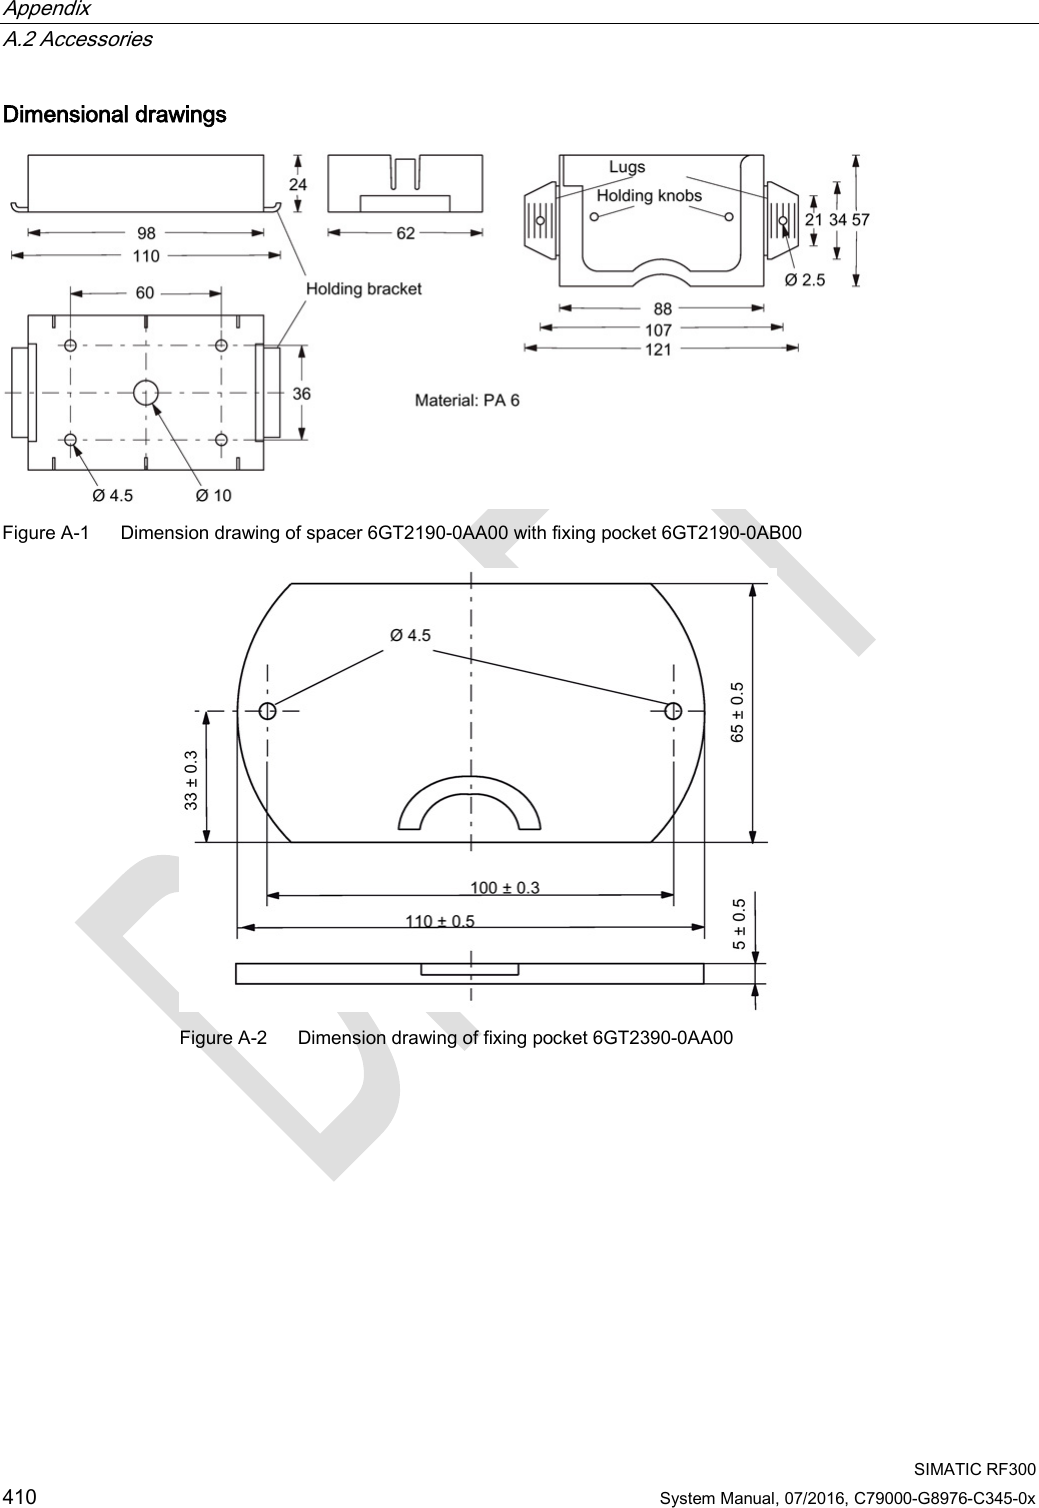 Appendix   A.2 Accessories  SIMATIC RF300 410 System Manual, 07/2016, C79000-G8976-C345-0x Dimensional drawings  Figure A-1  Dimension drawing of spacer 6GT2190-0AA00 with fixing pocket 6GT2190-0AB00   Figure A-2  Dimension drawing of fixing pocket 6GT2390-0AA00 